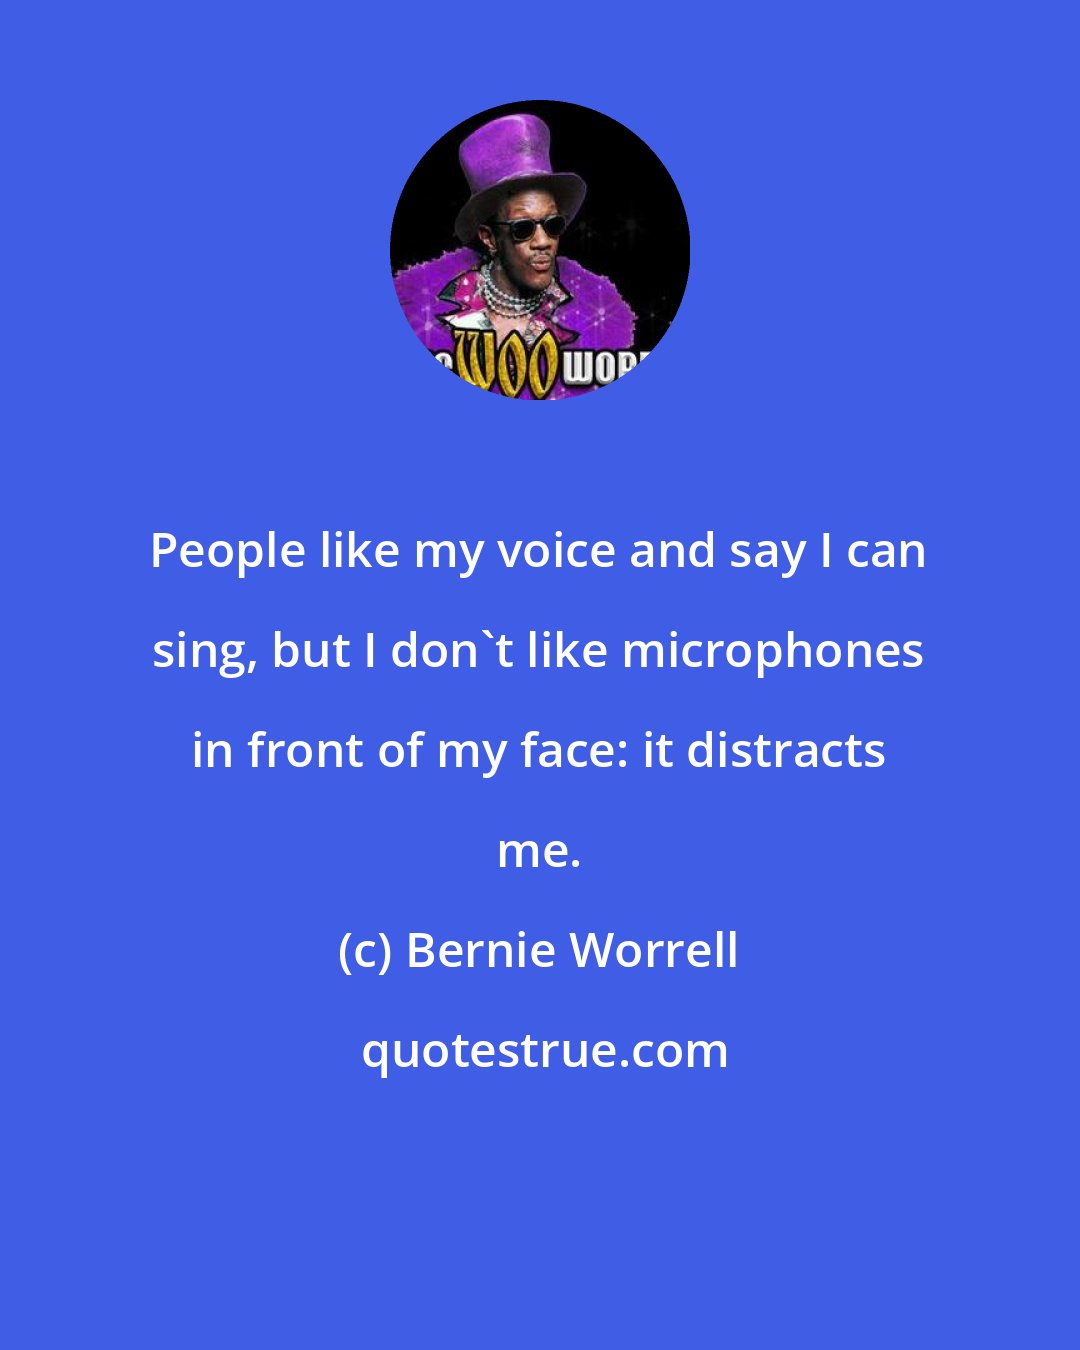 Bernie Worrell: People like my voice and say I can sing, but I don't like microphones in front of my face: it distracts me.